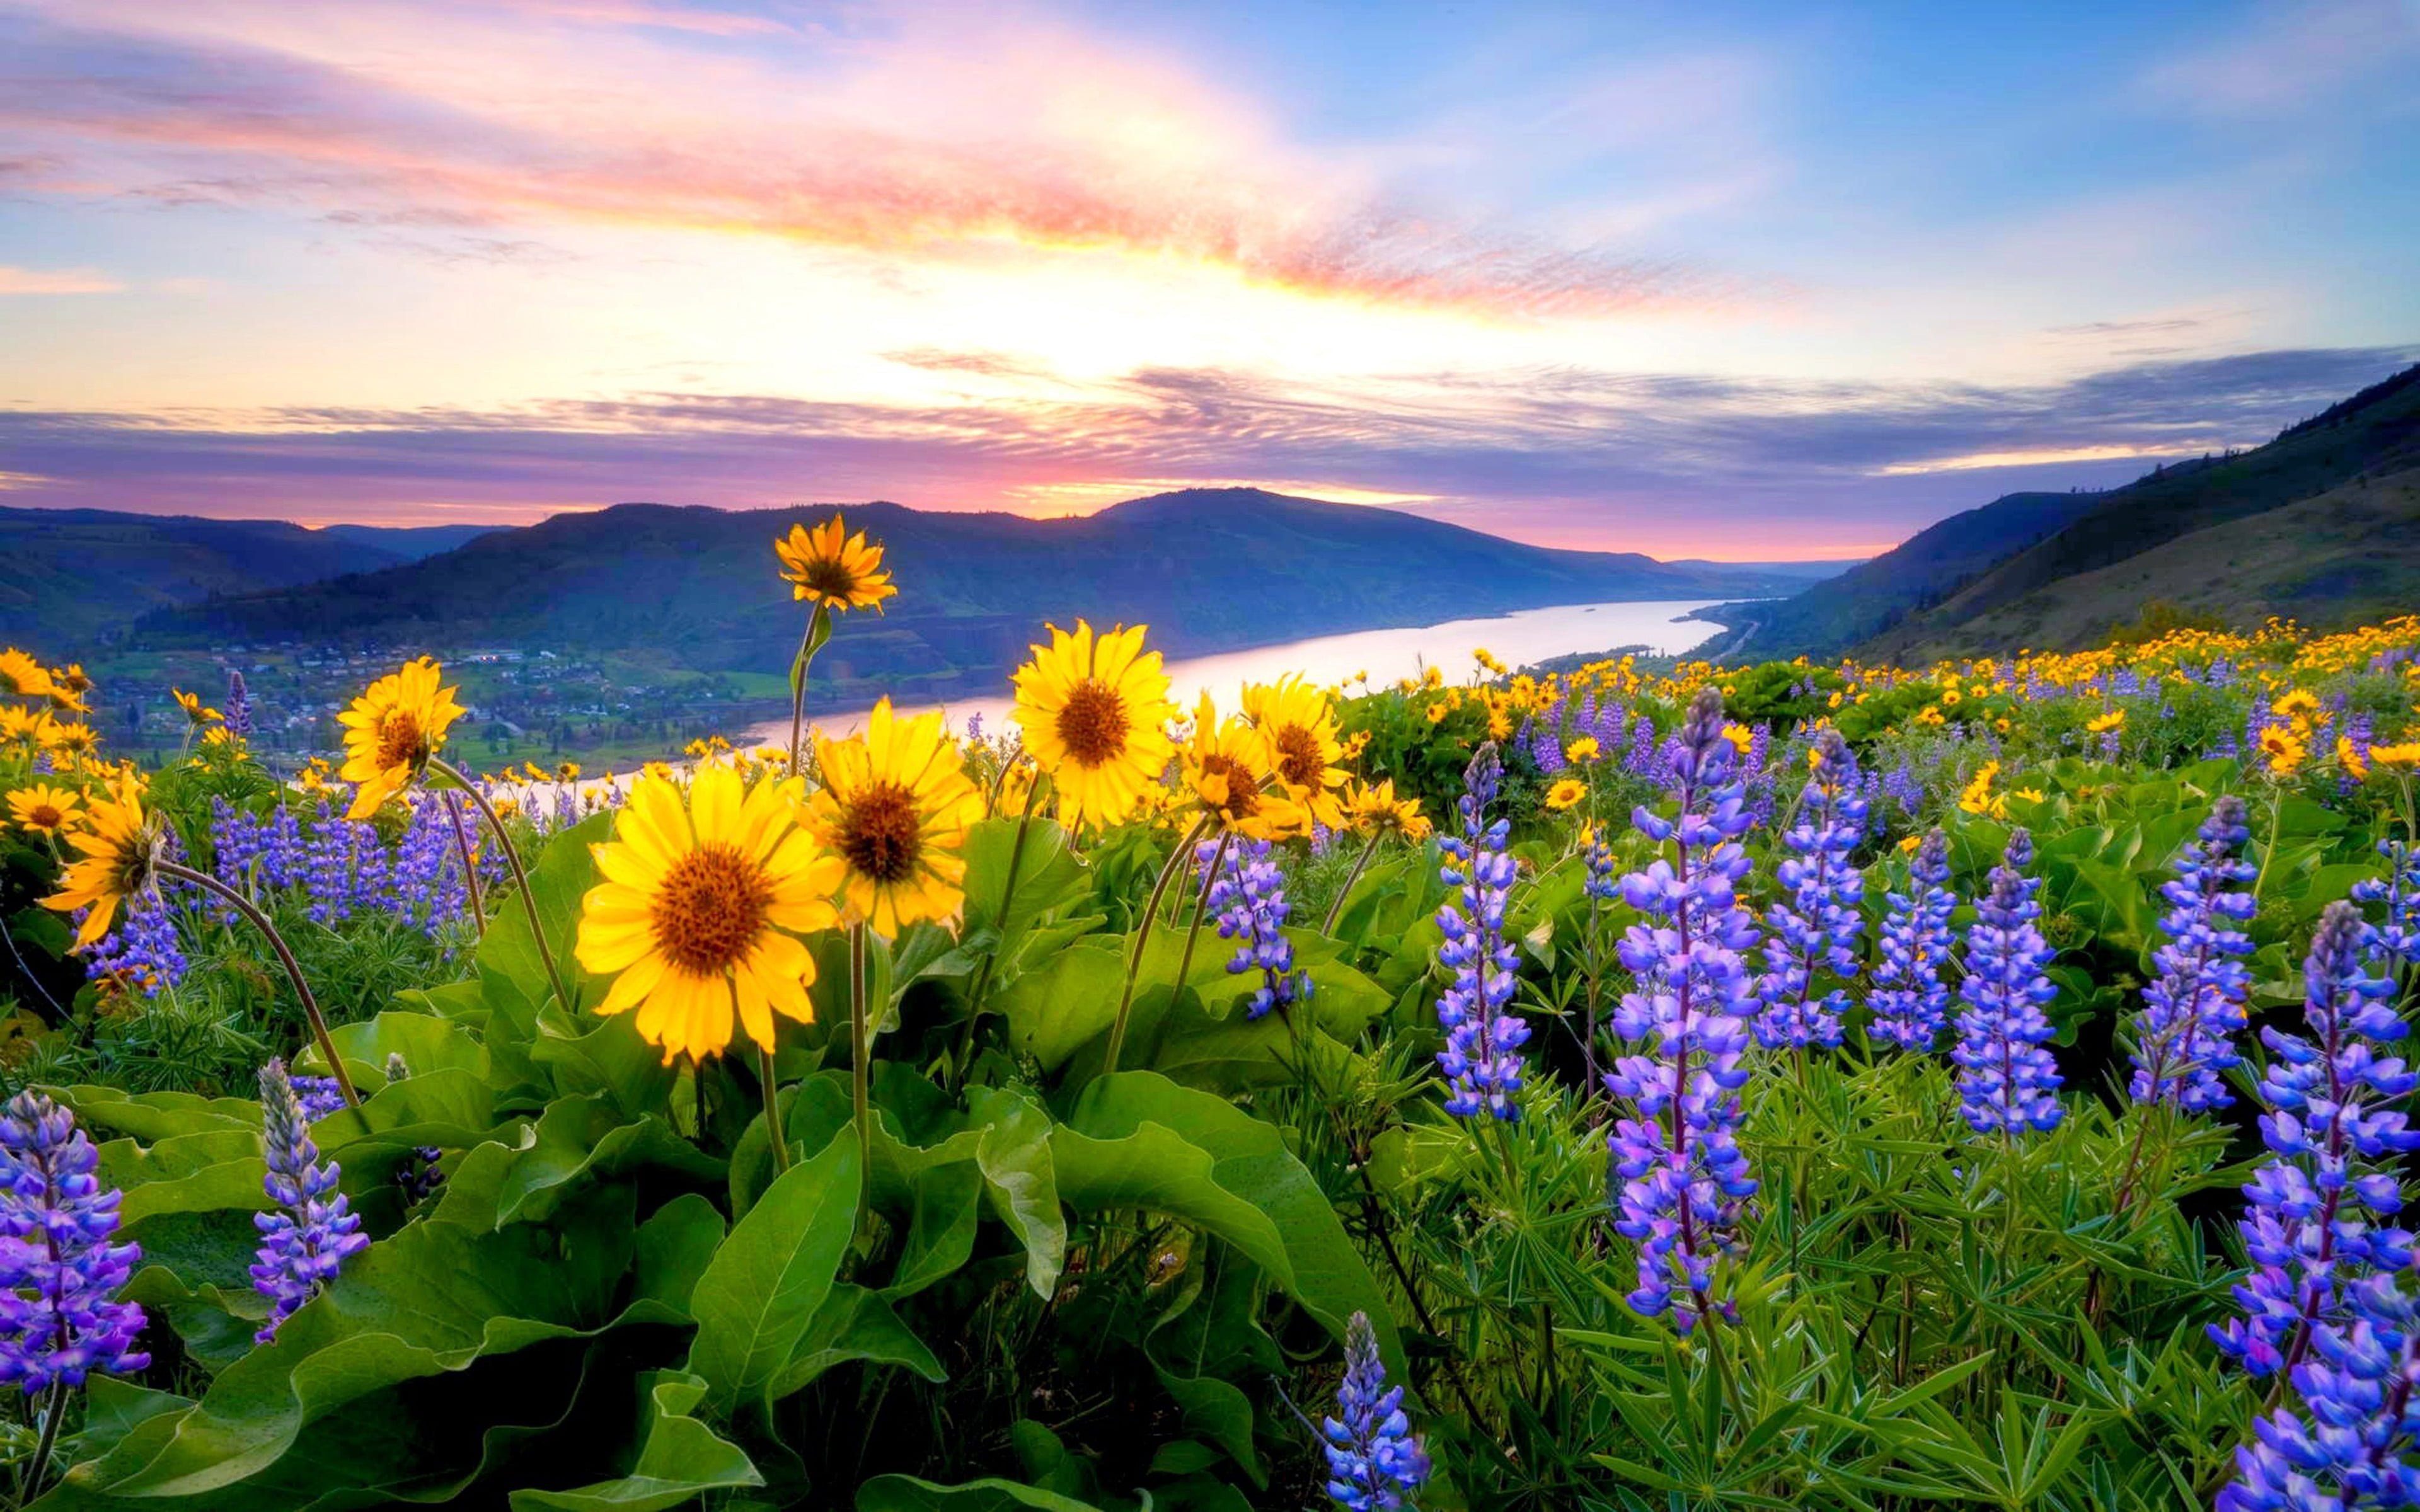 Spring Flowers Mountain Lake Hills Red Cloud Sunset Hd Desktop Backgrounds Free Download 3840×2400